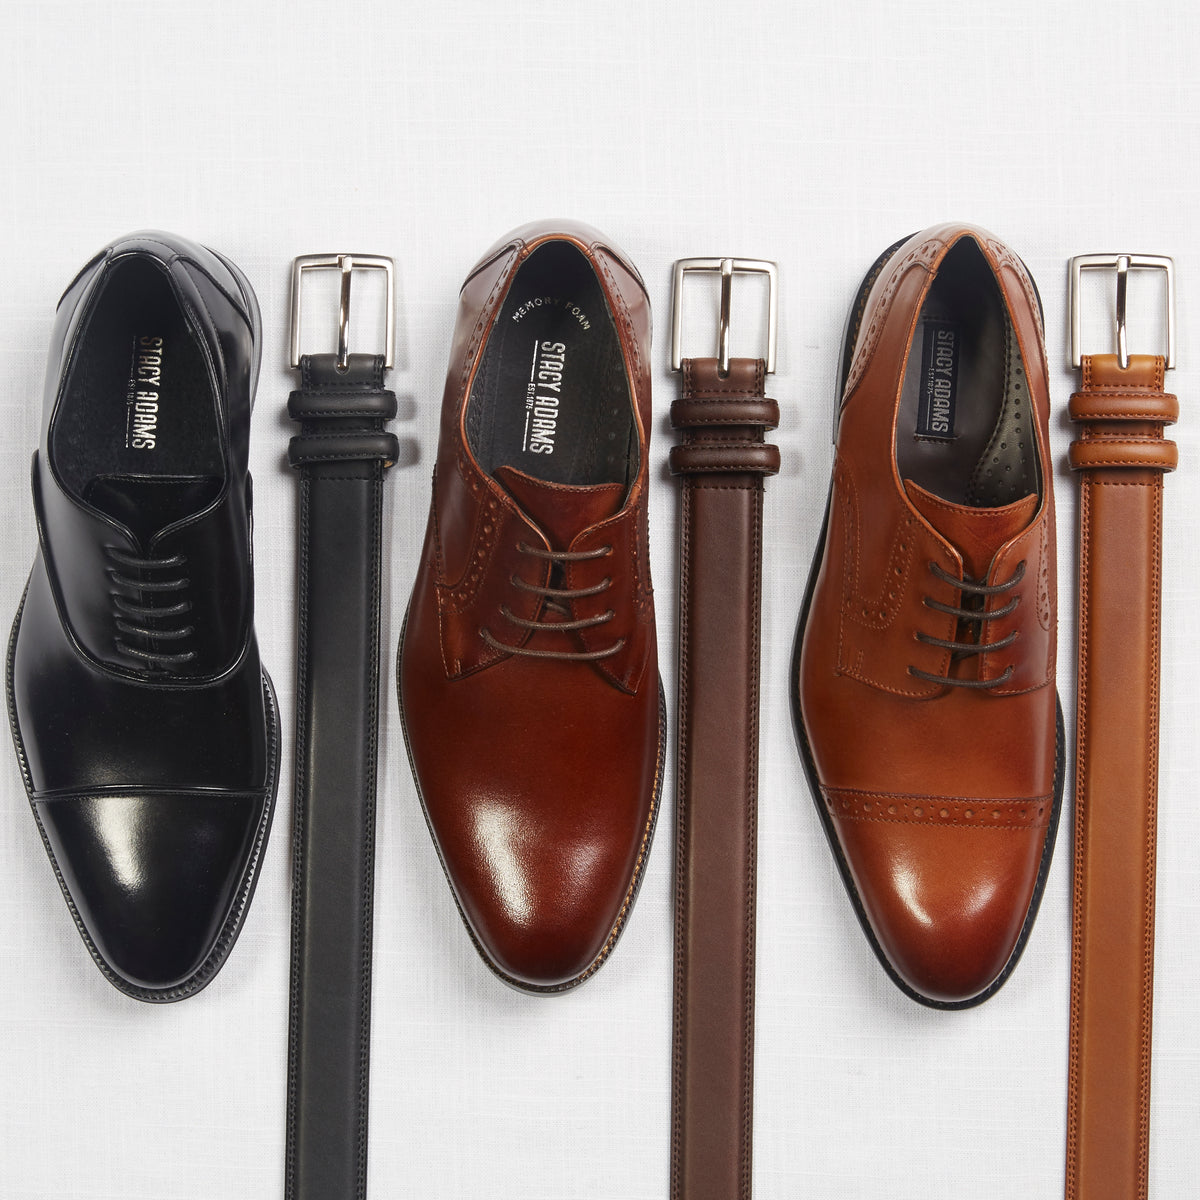 colour shoes to wear with navy suit